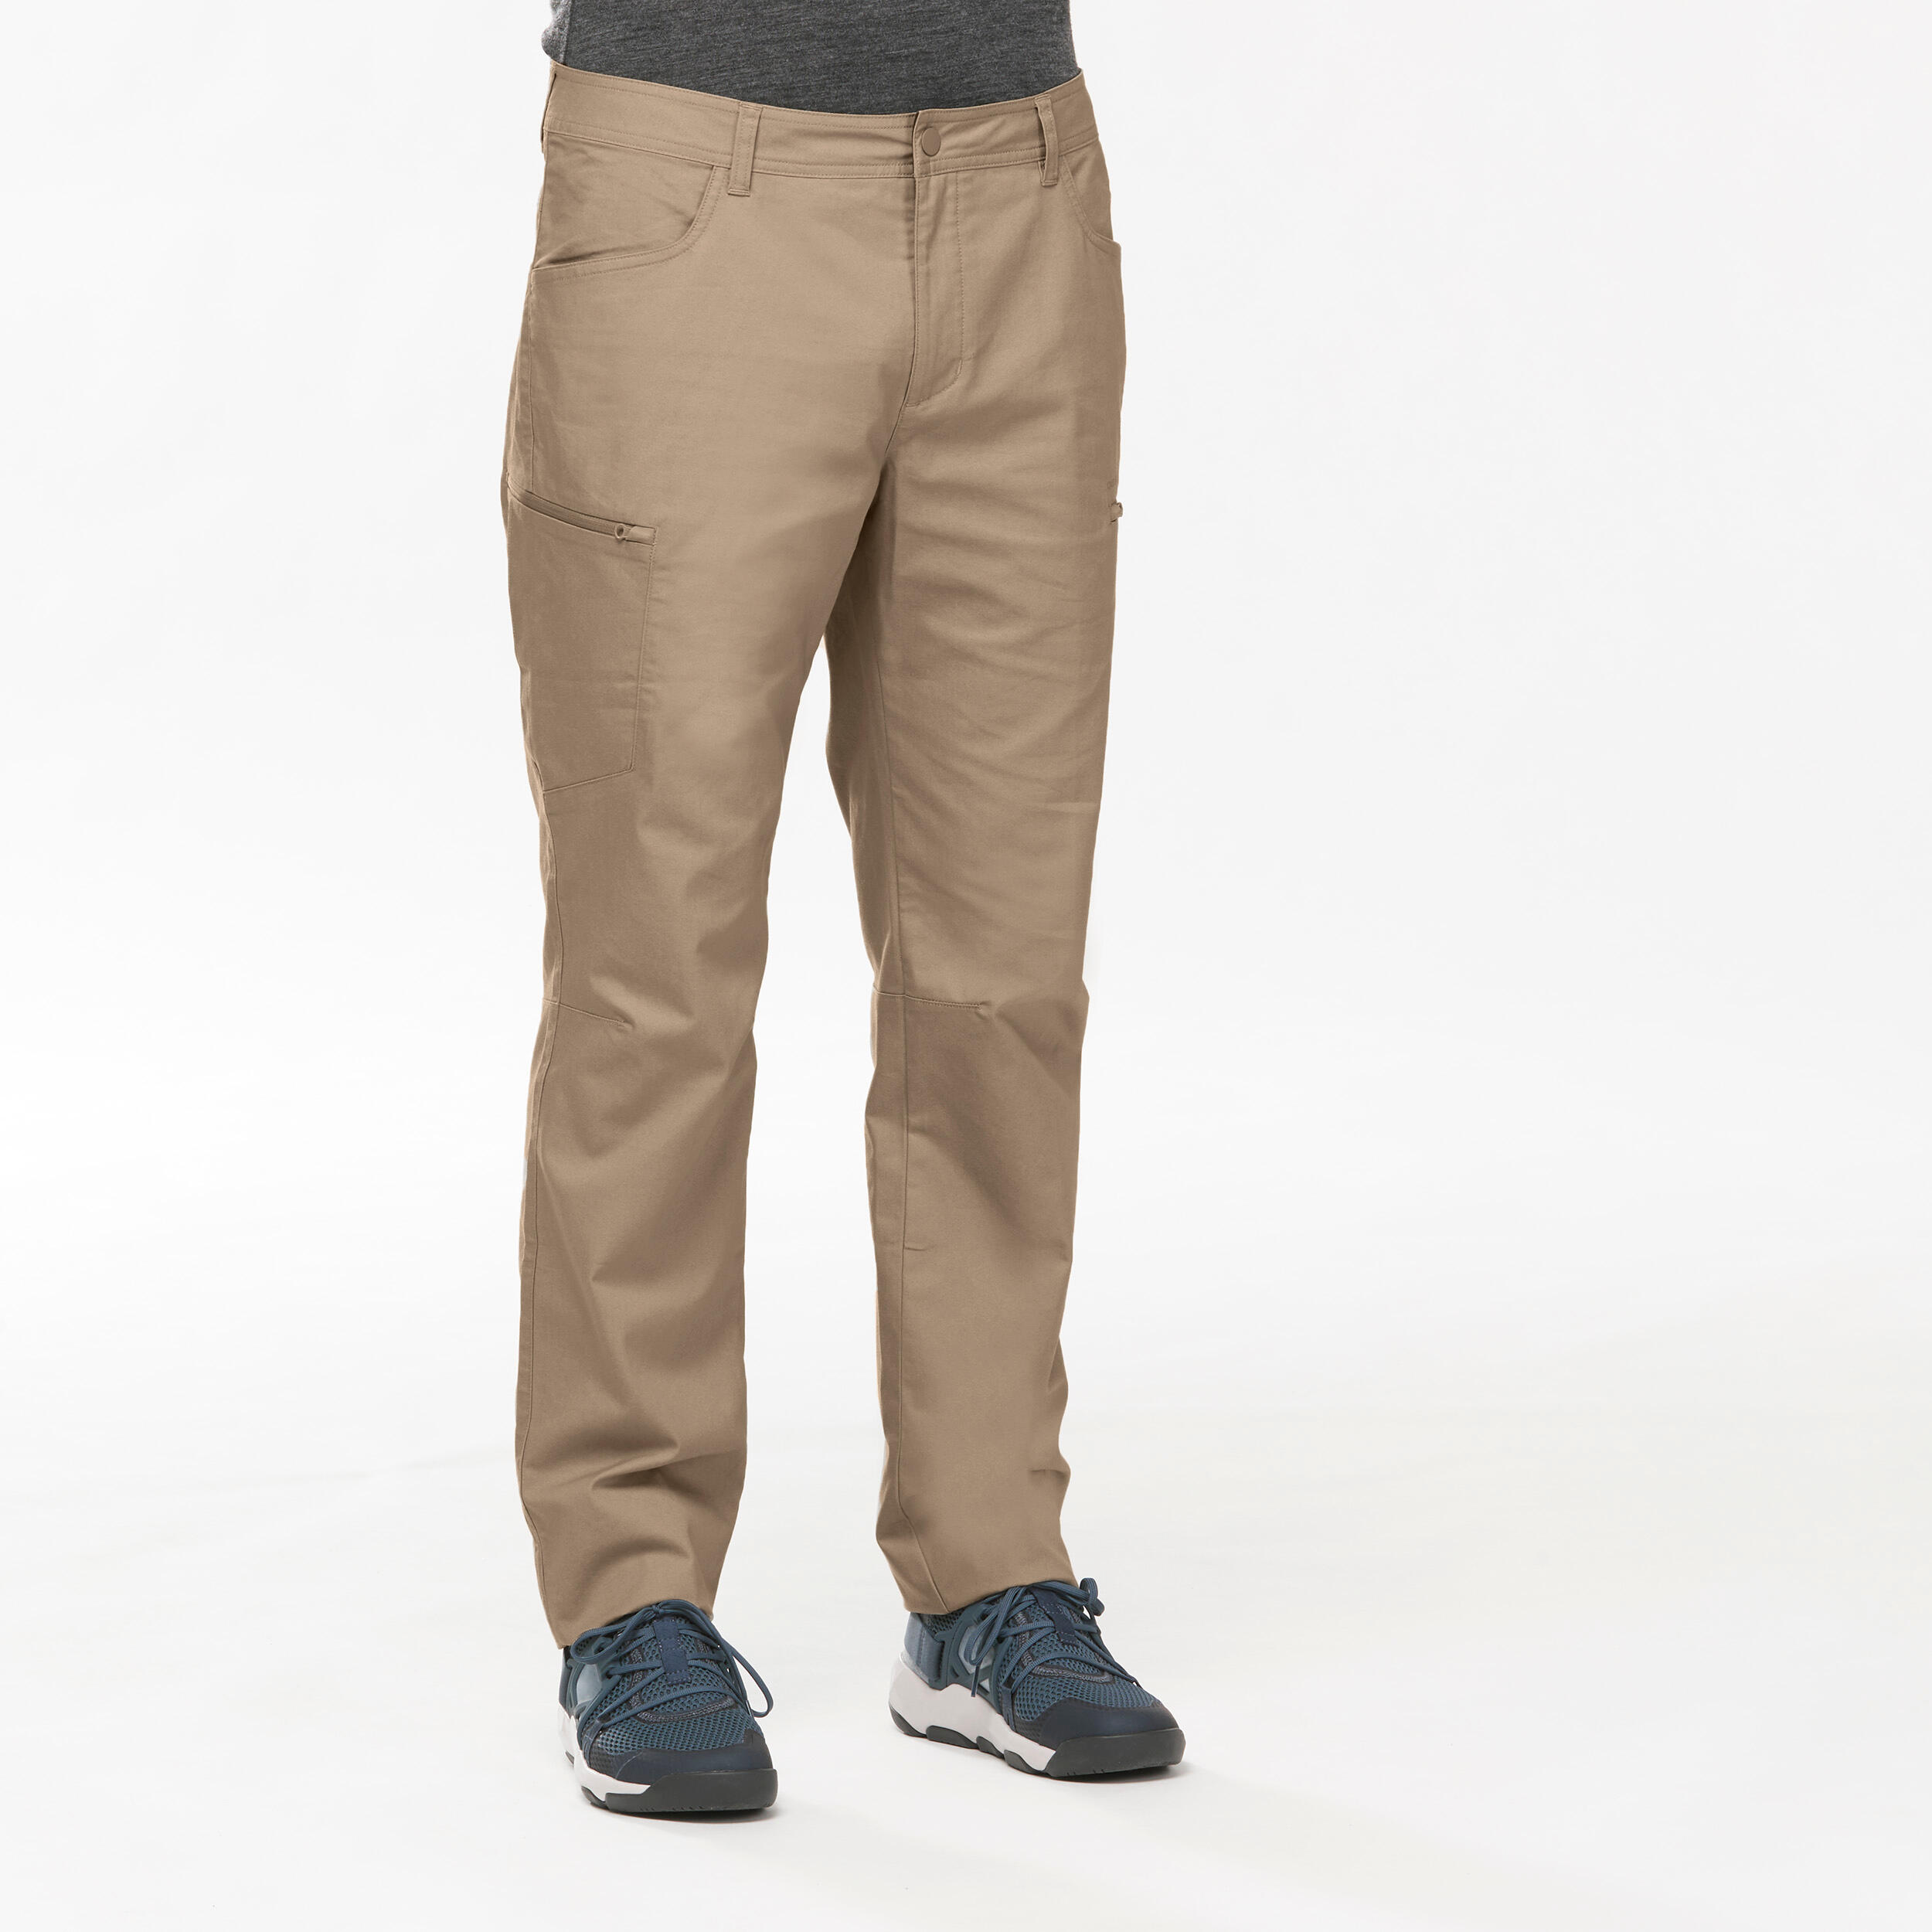 The Best Hiking Trousers for Men by Nike Nike IN